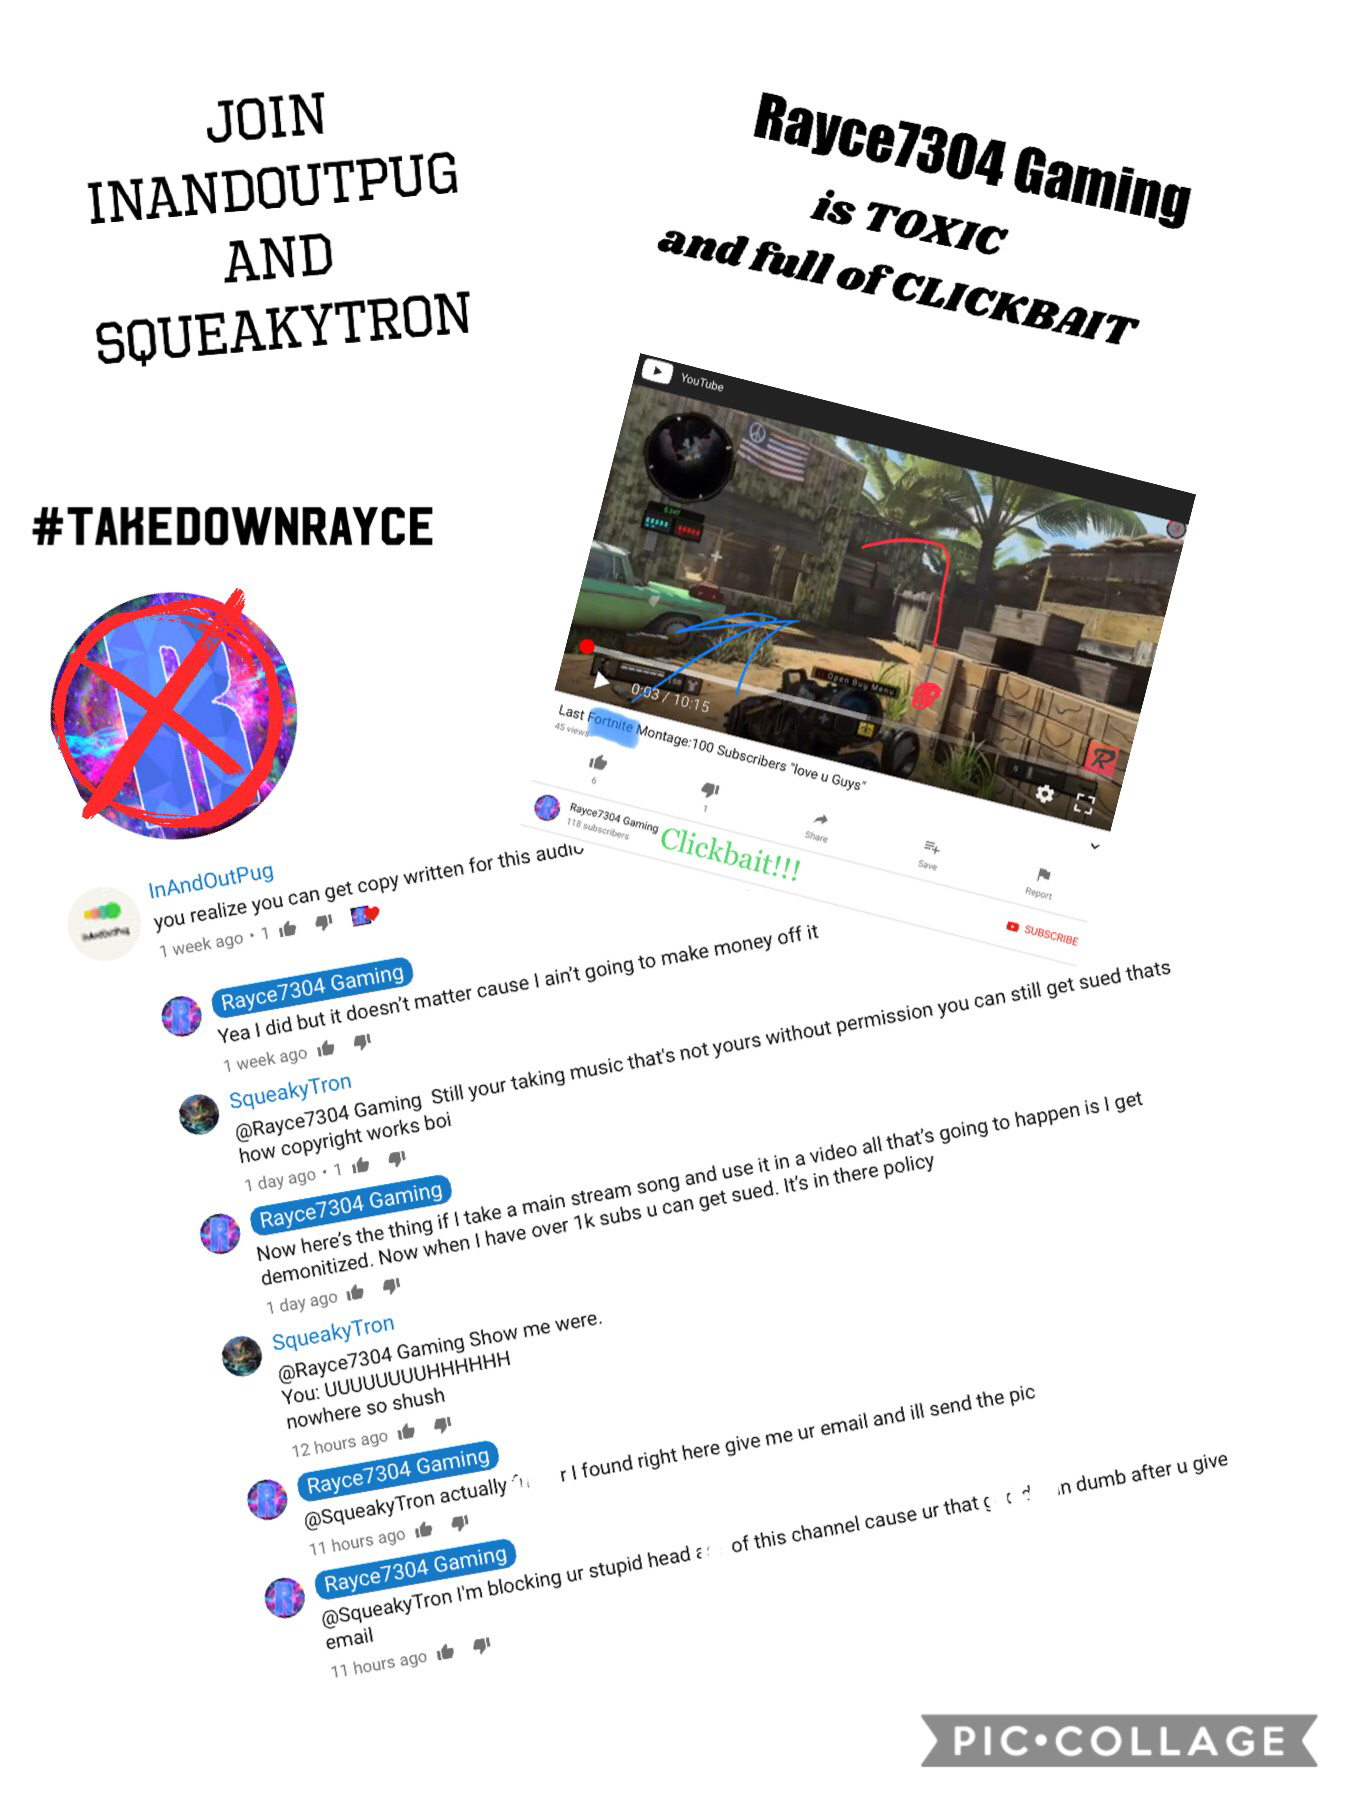 Rayce7304 Gaming is a YouTube Channel that has clearly broken the Policies that YouTube has in place. Join InAndOutPug and SqueakyTron in the #TakeDownRayce campaign.

Check them out at...

tinyurl.com/inandoutpug
and
tinyurl.com/squeakytron